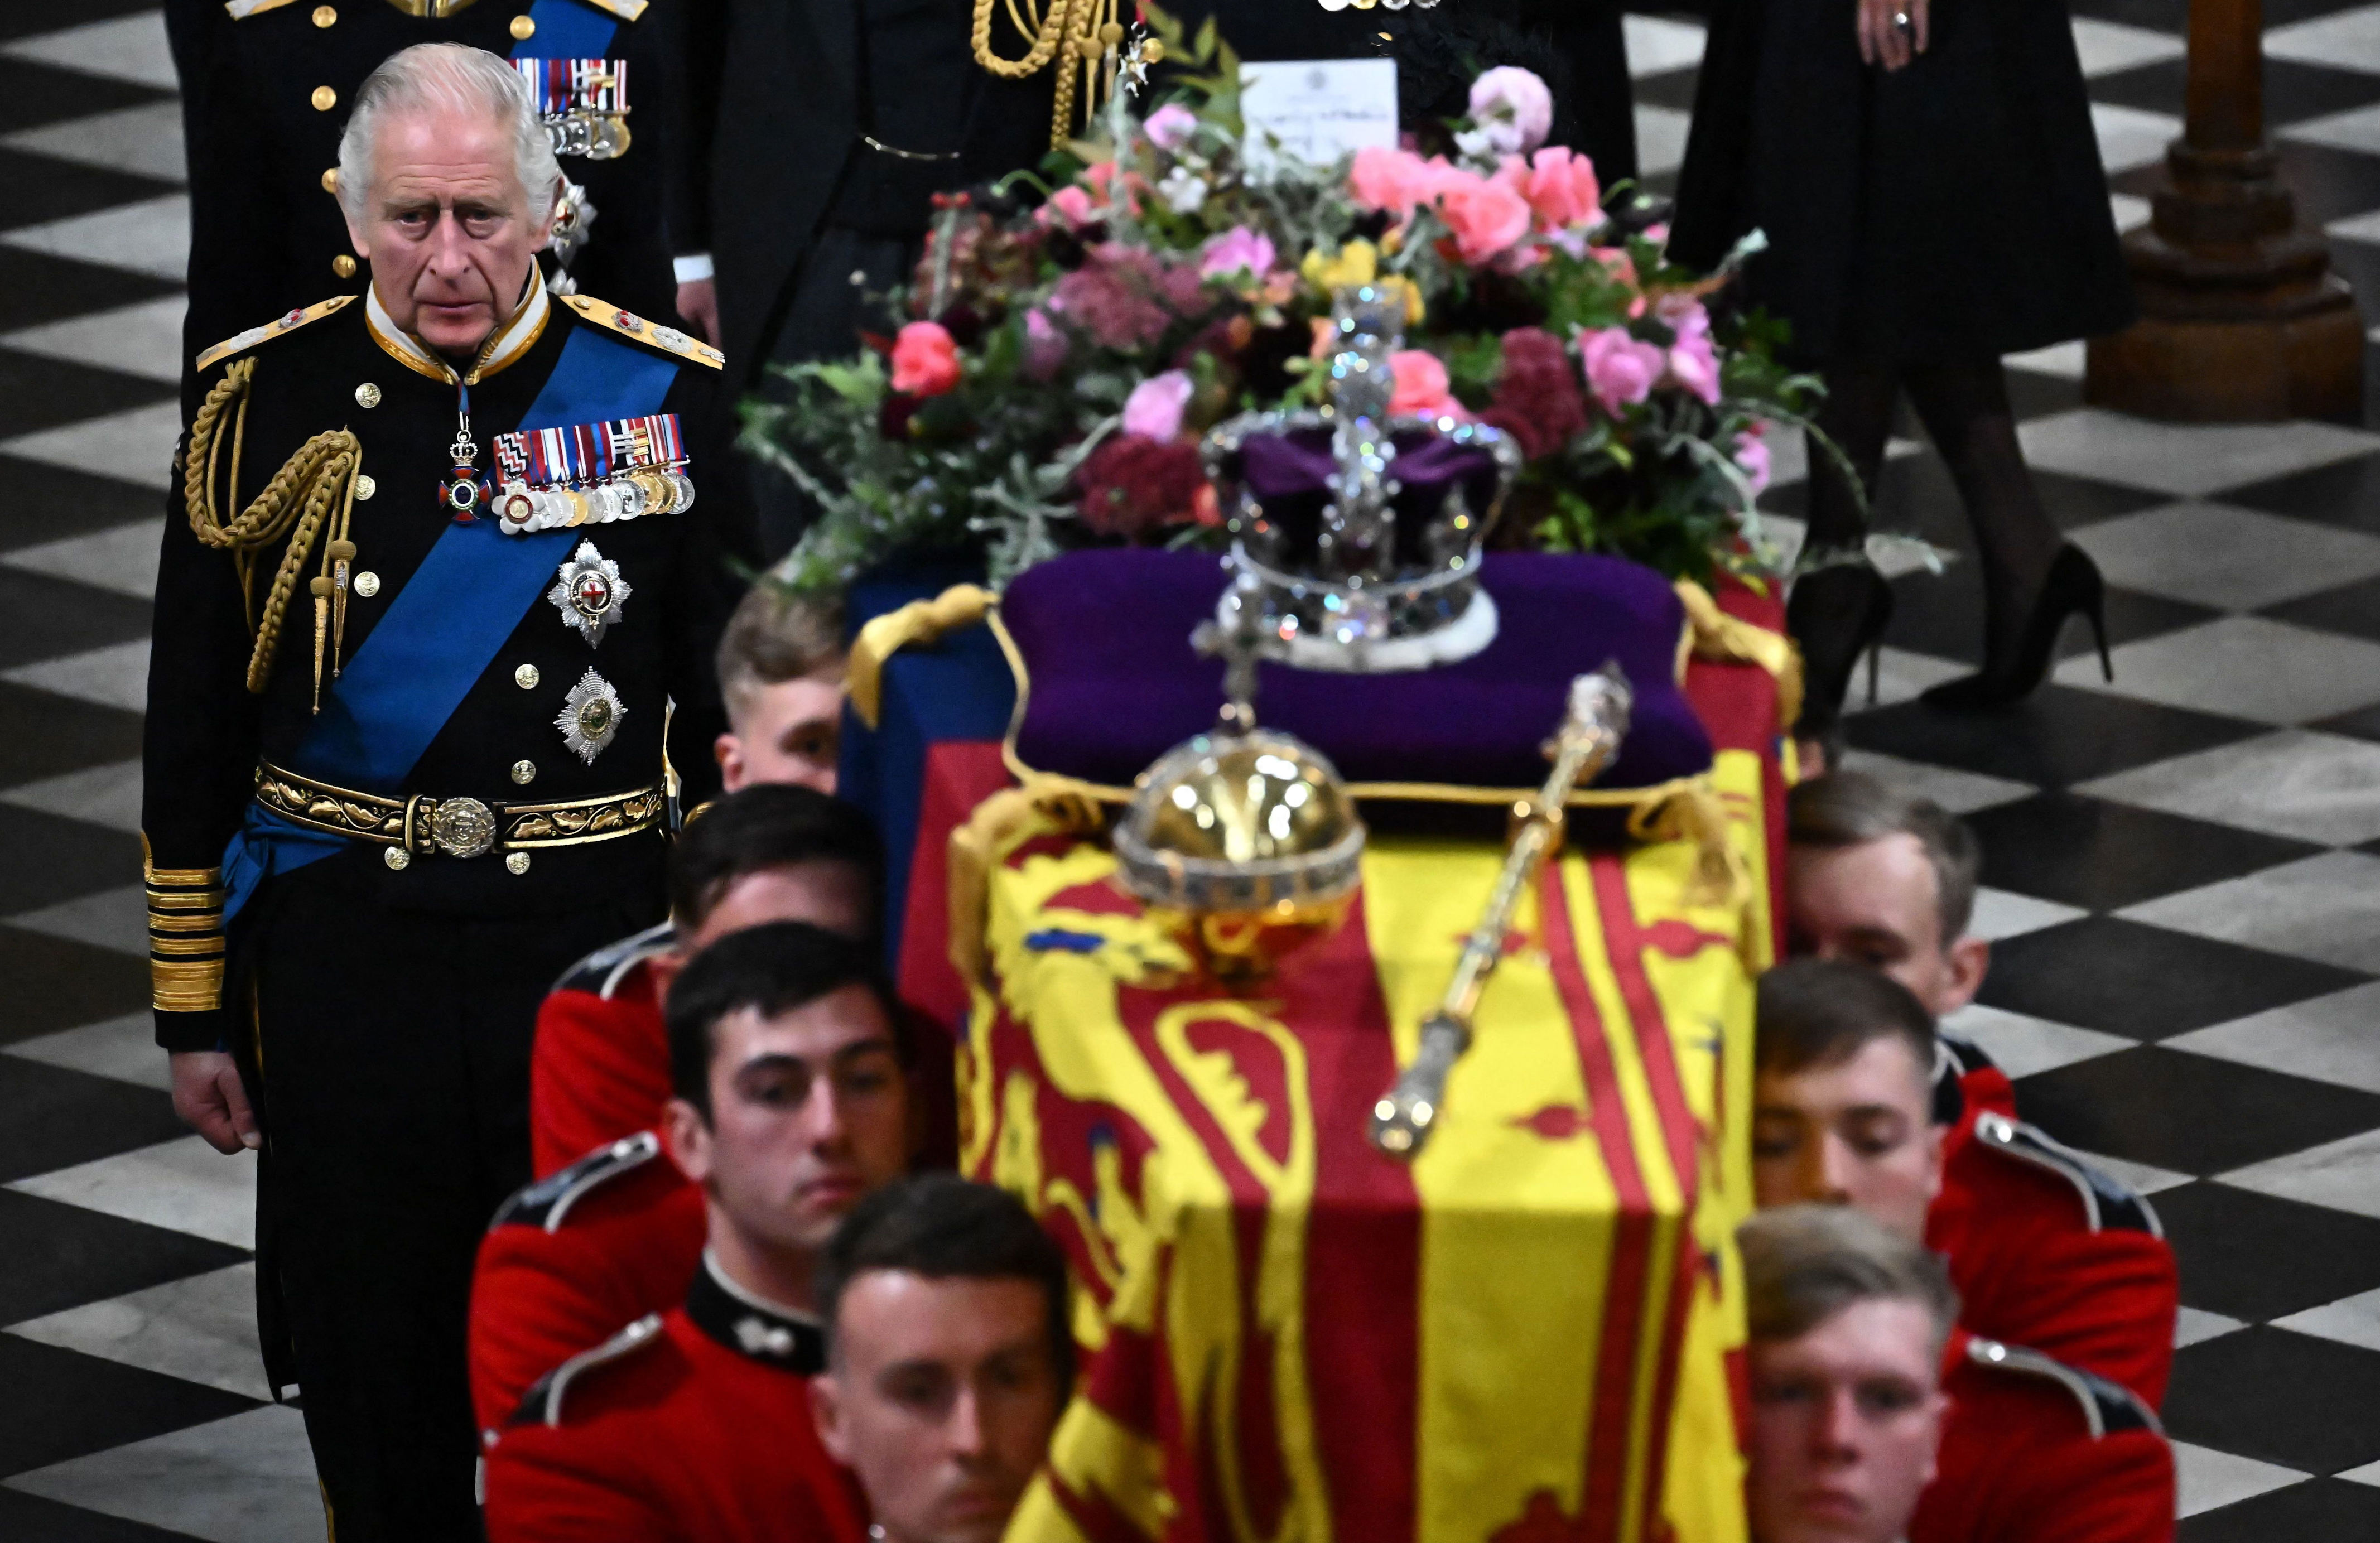 <p>Britain's King Charles III walked behind the coffin of Queen Elizabeth II as it left Westminster Abbey in London during <a href="https://www.wonderwall.com/celebrity/royals/best-photos-from-queen-elizabeth-ii-funeral-king-charles-princes-william-prince-harry-george-charlotte-kate-meghan652347.gallery">her state funeral</a> on Sept. 19, 2022. The casket was draped in the Royal Standard and adorned with the Imperial State Crown, the Sovereign's Orb and Sceptre and a floral wreath. At King Charles III's request, the wreath contained foliage of rosemary, English oak and myrtle cut from a plant grown from the myrtle in the queen's 1947 wedding bouquet plus flowers in shades of gold, pink and burgundy, with touches of white, cut from the gardens of royal residences. The card on top, written by the king, read, "In loving and devoted memory, Charles R." </p>